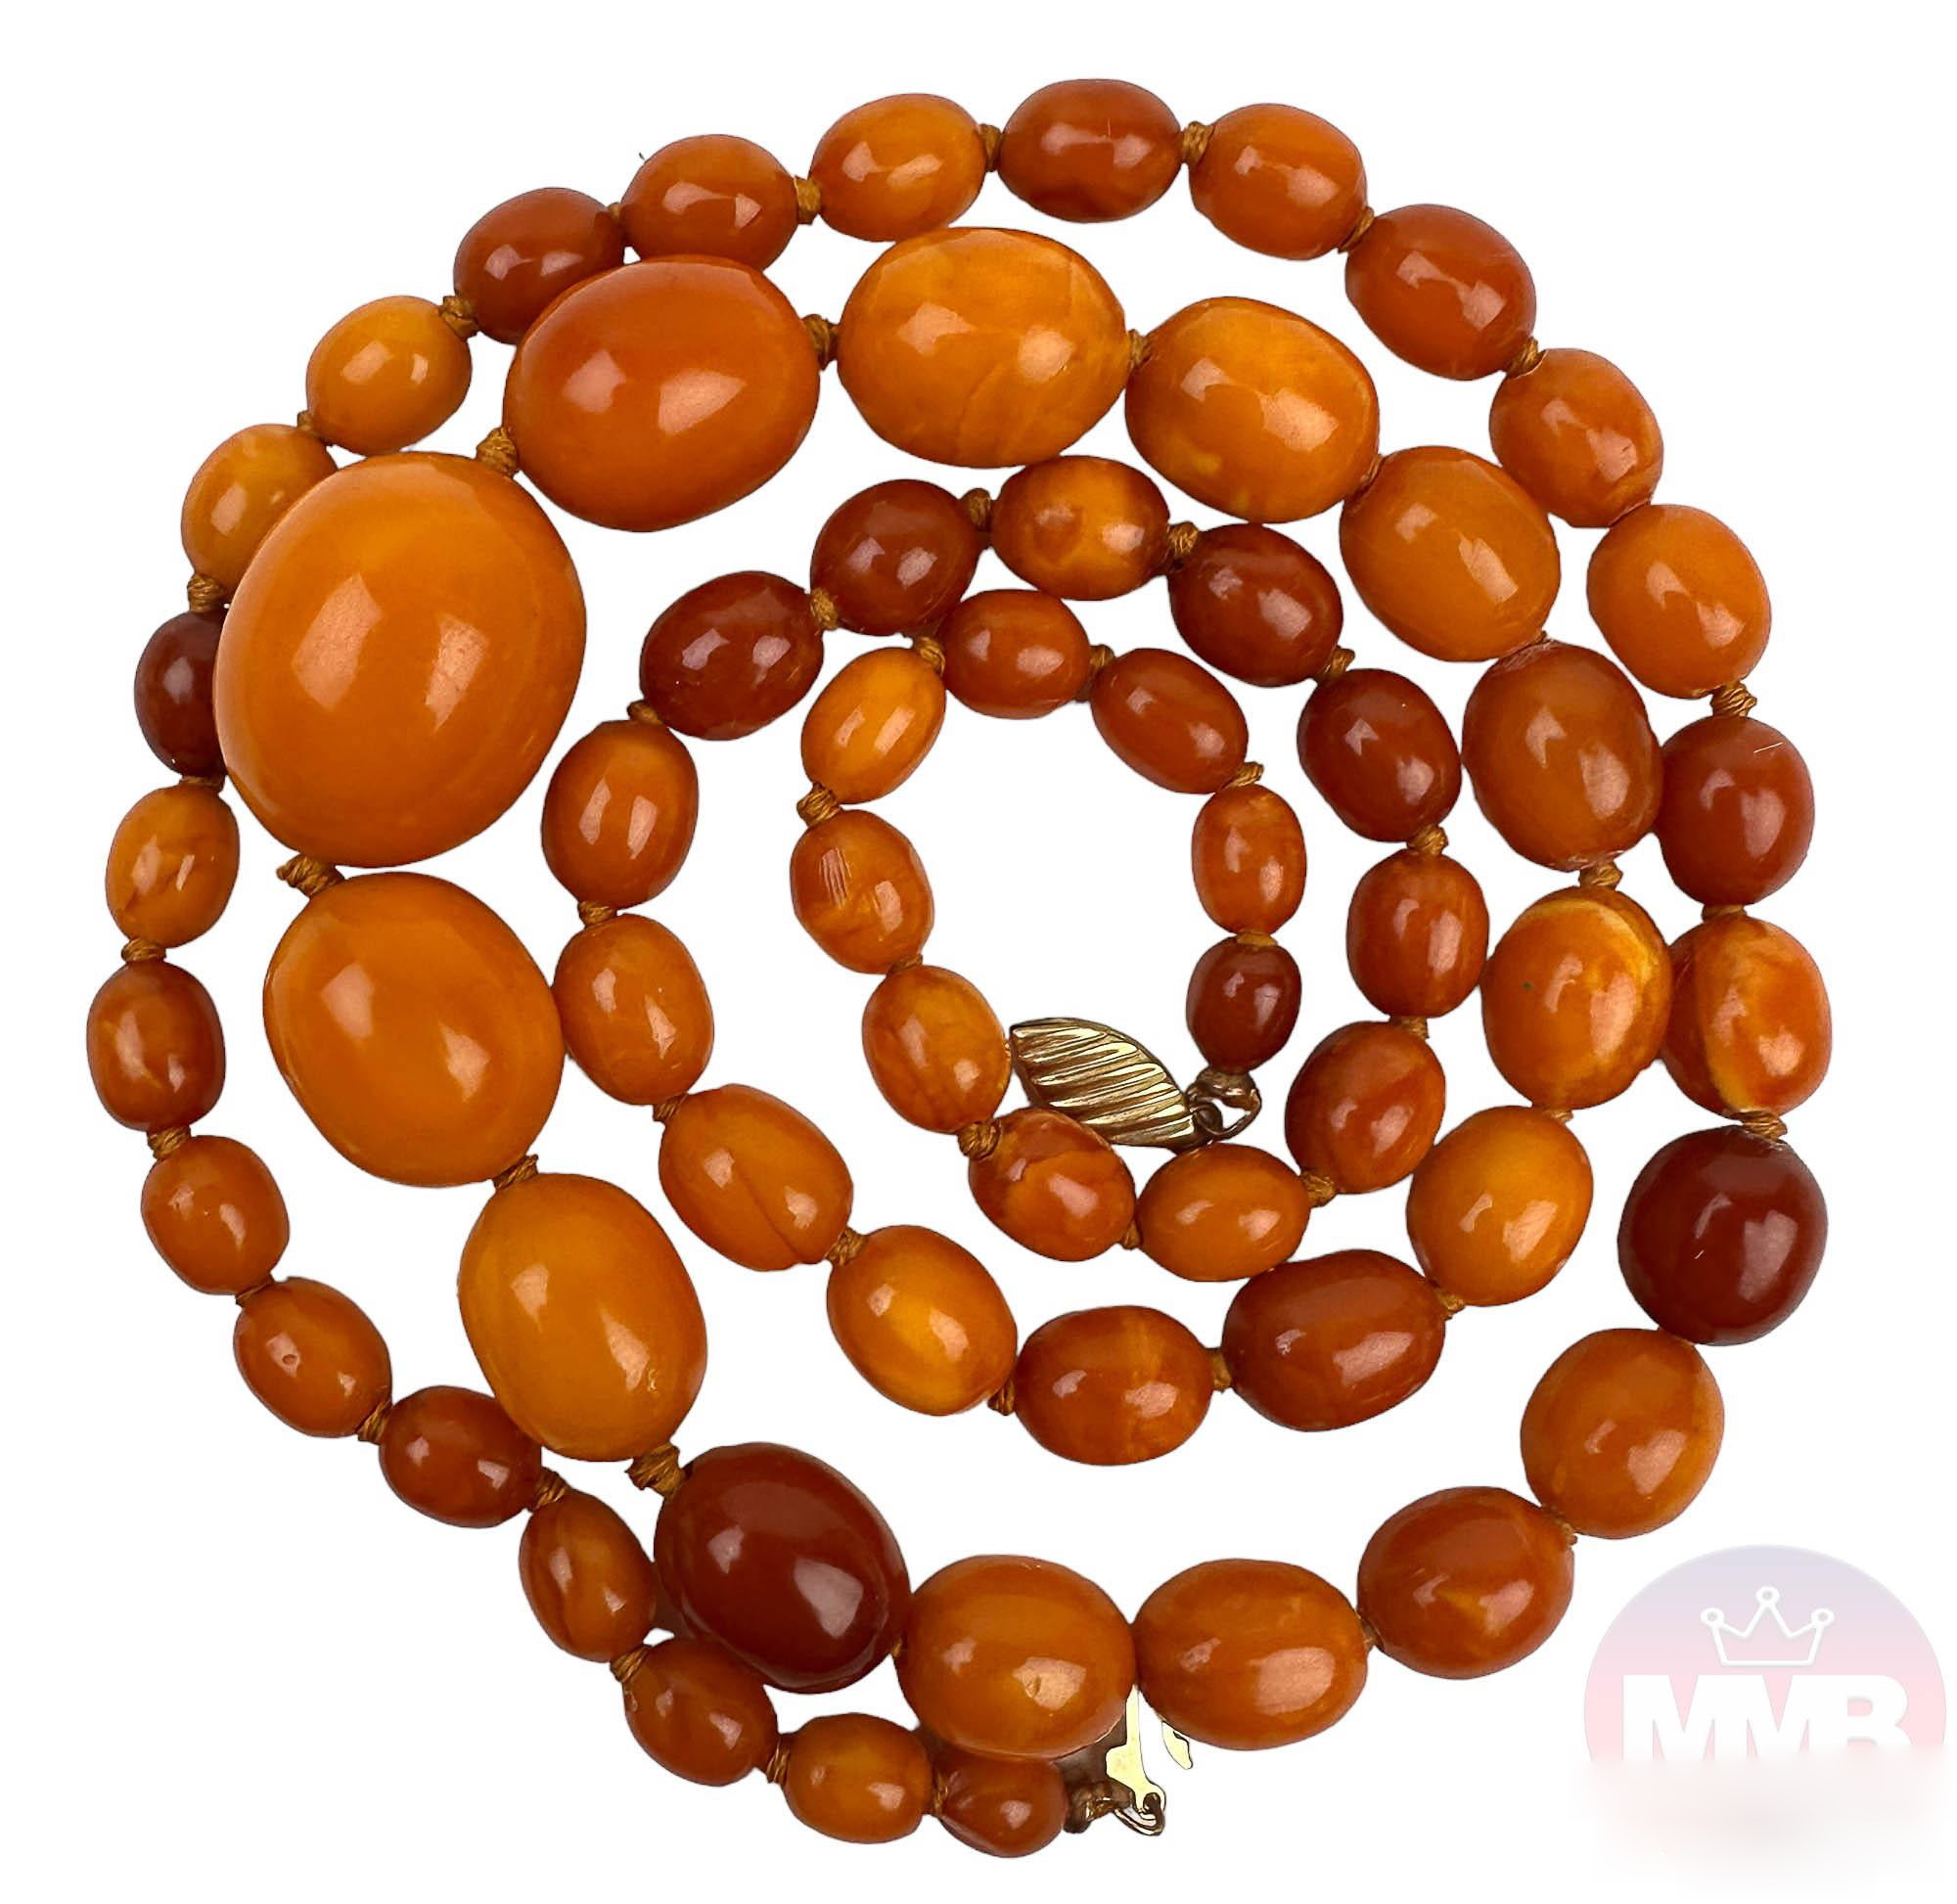 Amber Type Graduated Bead Necklaces  - Image 4 of 6